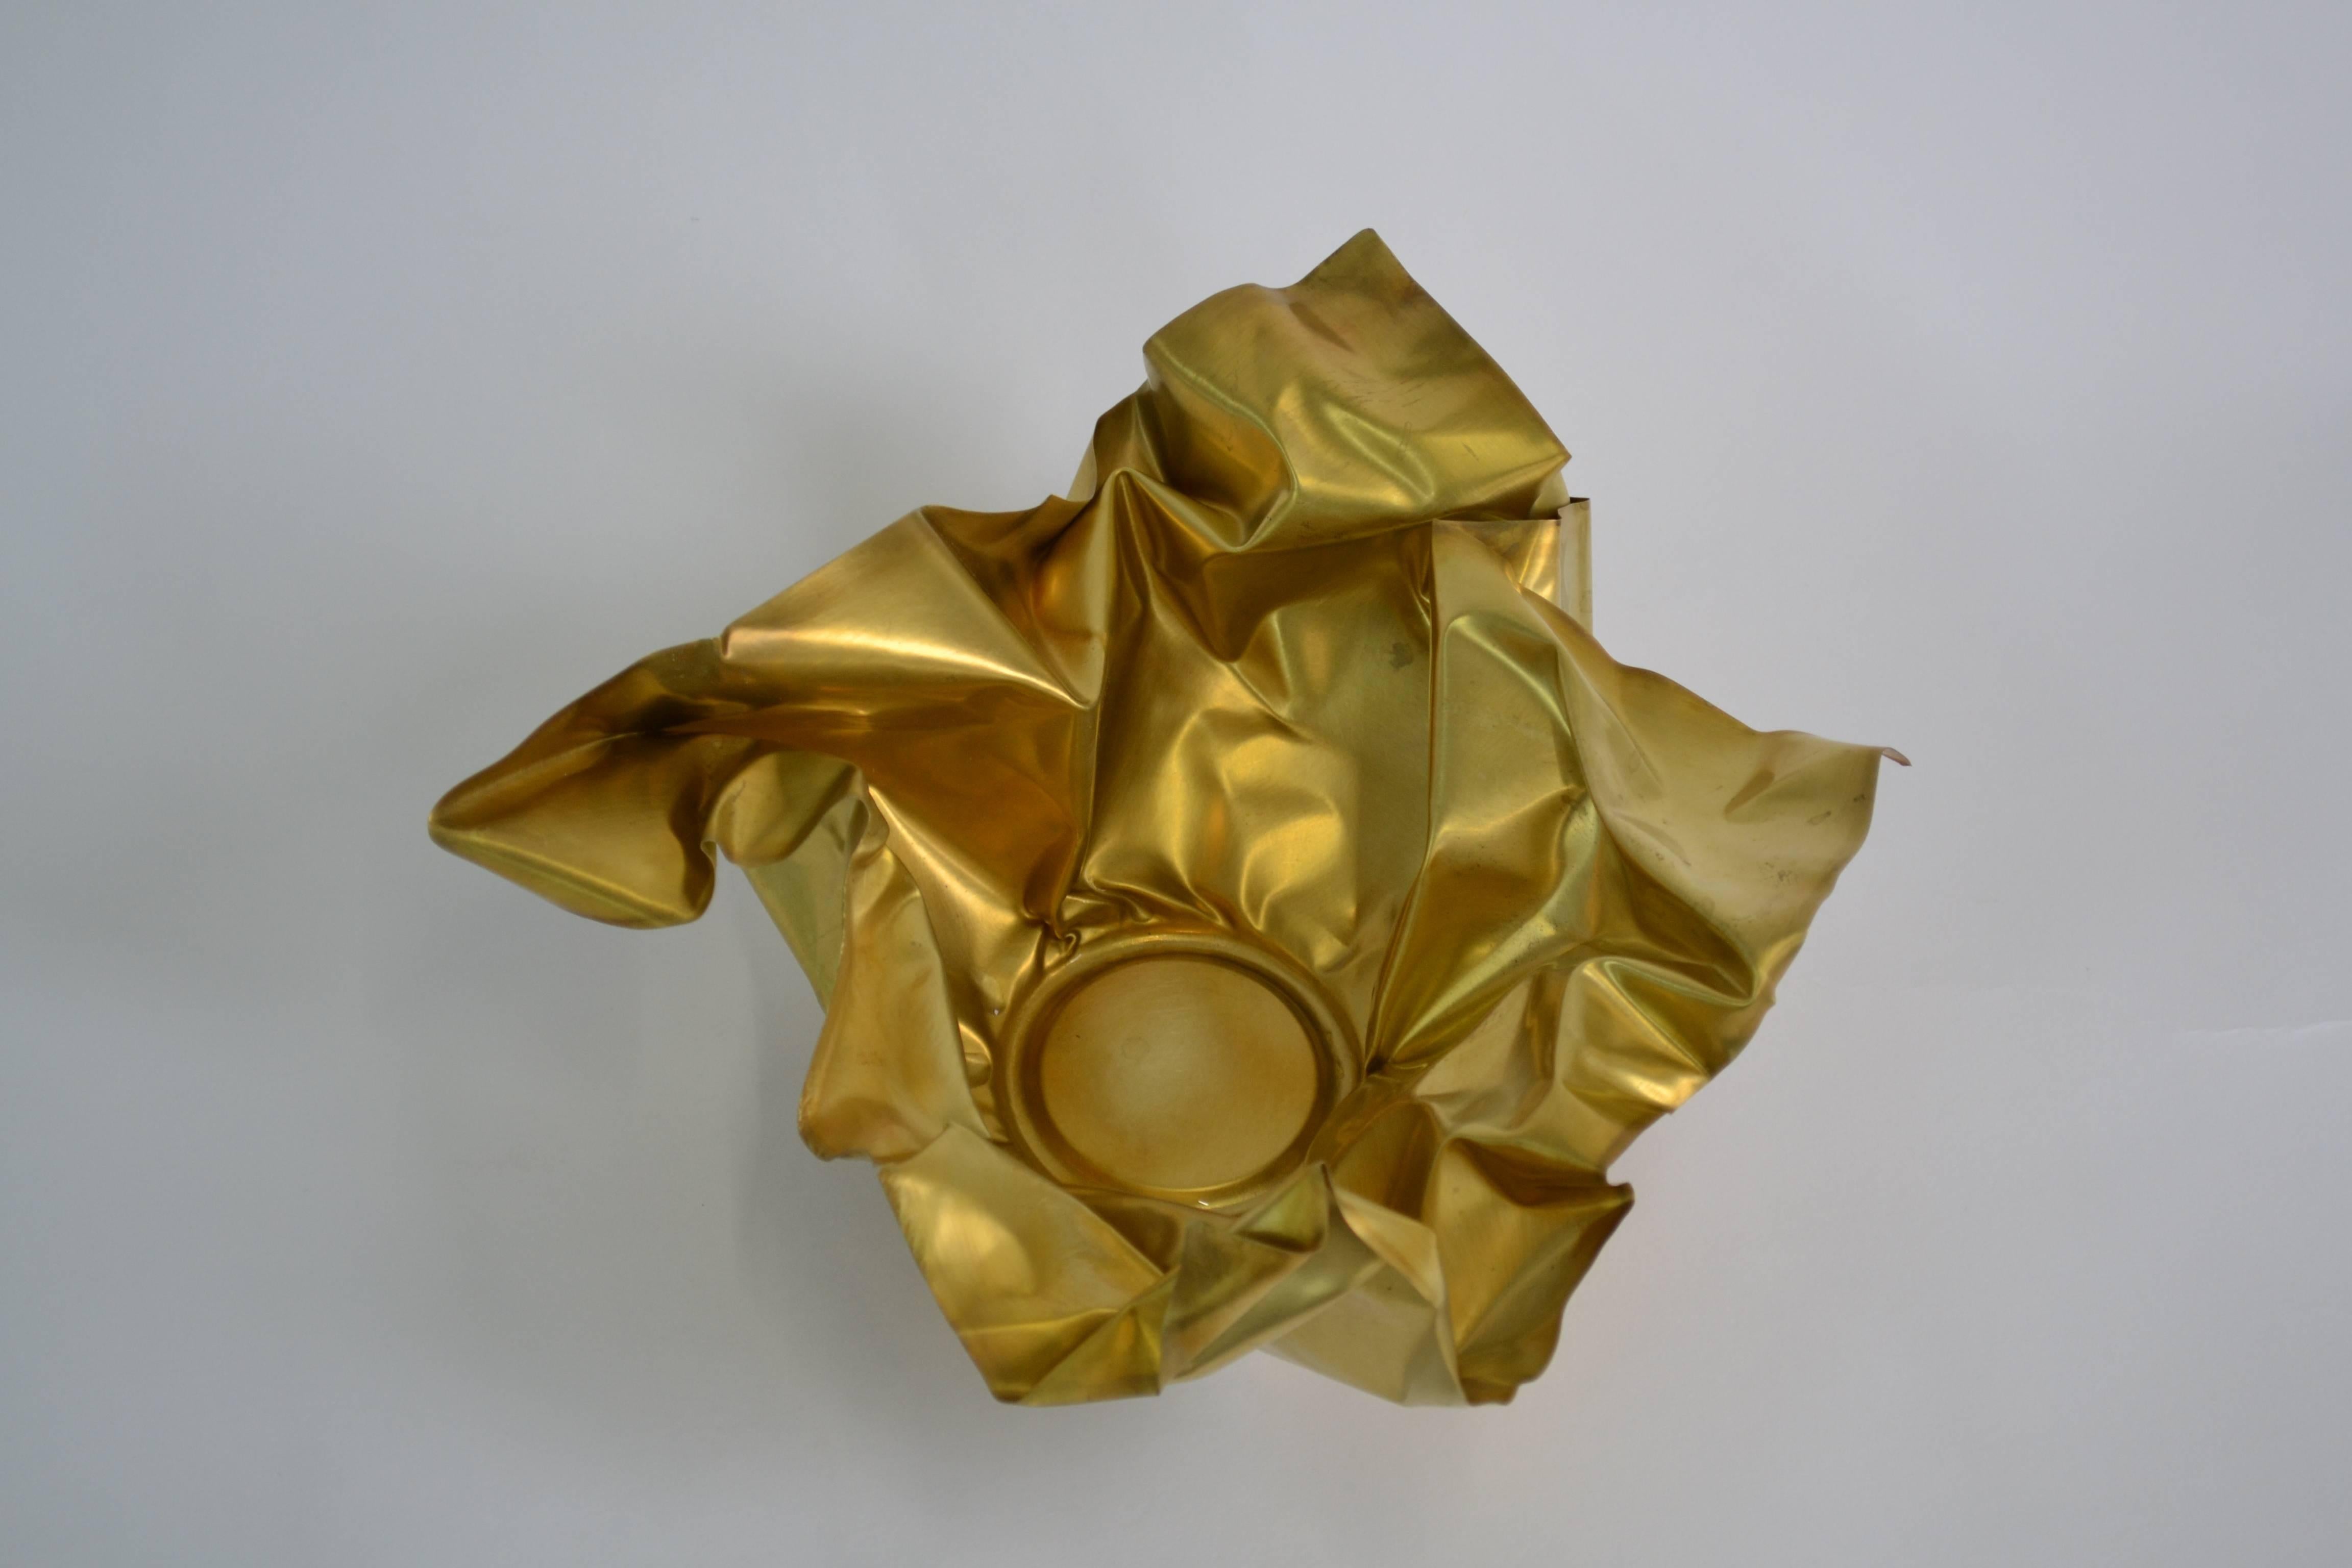 The paper series embodies the idea of crumpling paper set in time. The materiality of the brass is utilized by the intricate folds and bends that not only resemble paper, but adds structure to the bowl. Each paper is unique and hand-sculpted in